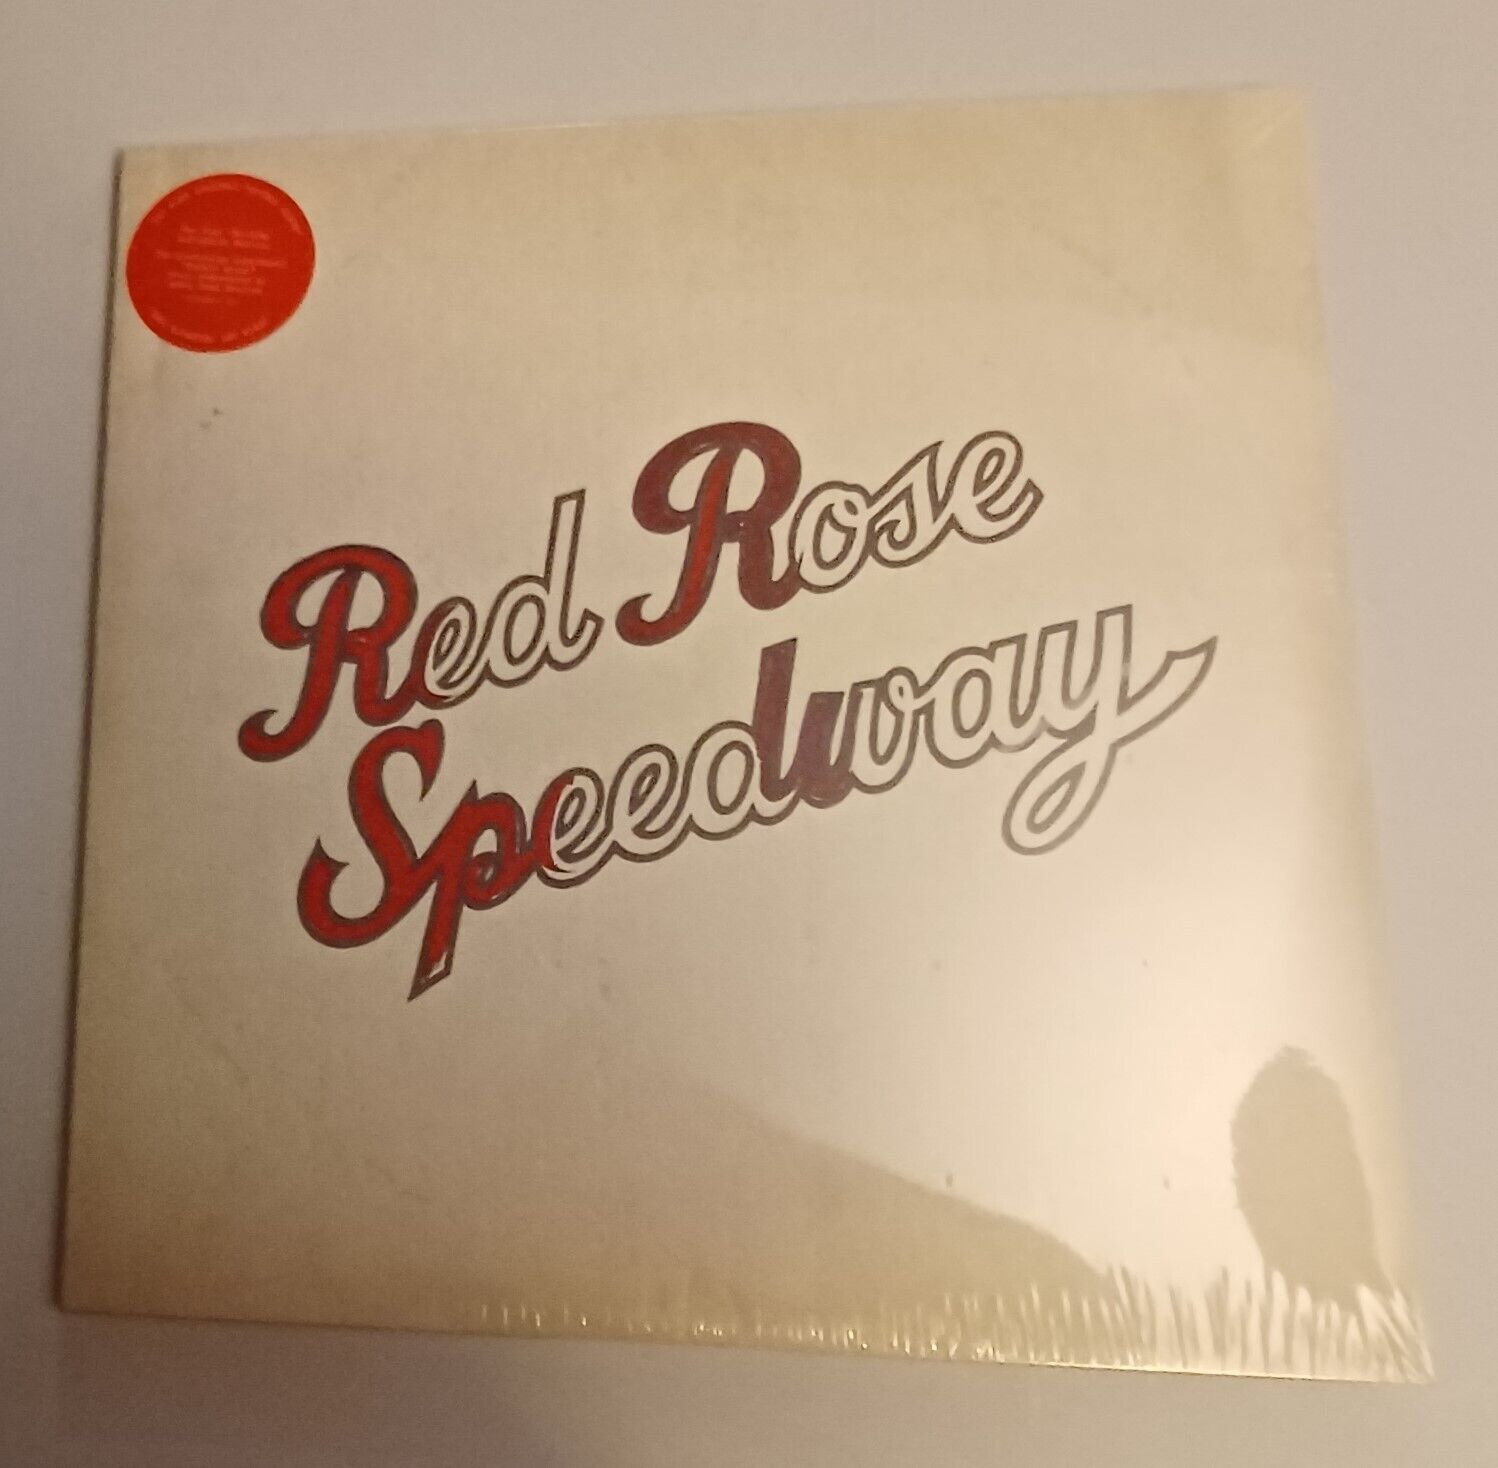 PAUL MCCARTNEY & WINGS Red Rose Speedway 2018 Reconstruct edition vinyl